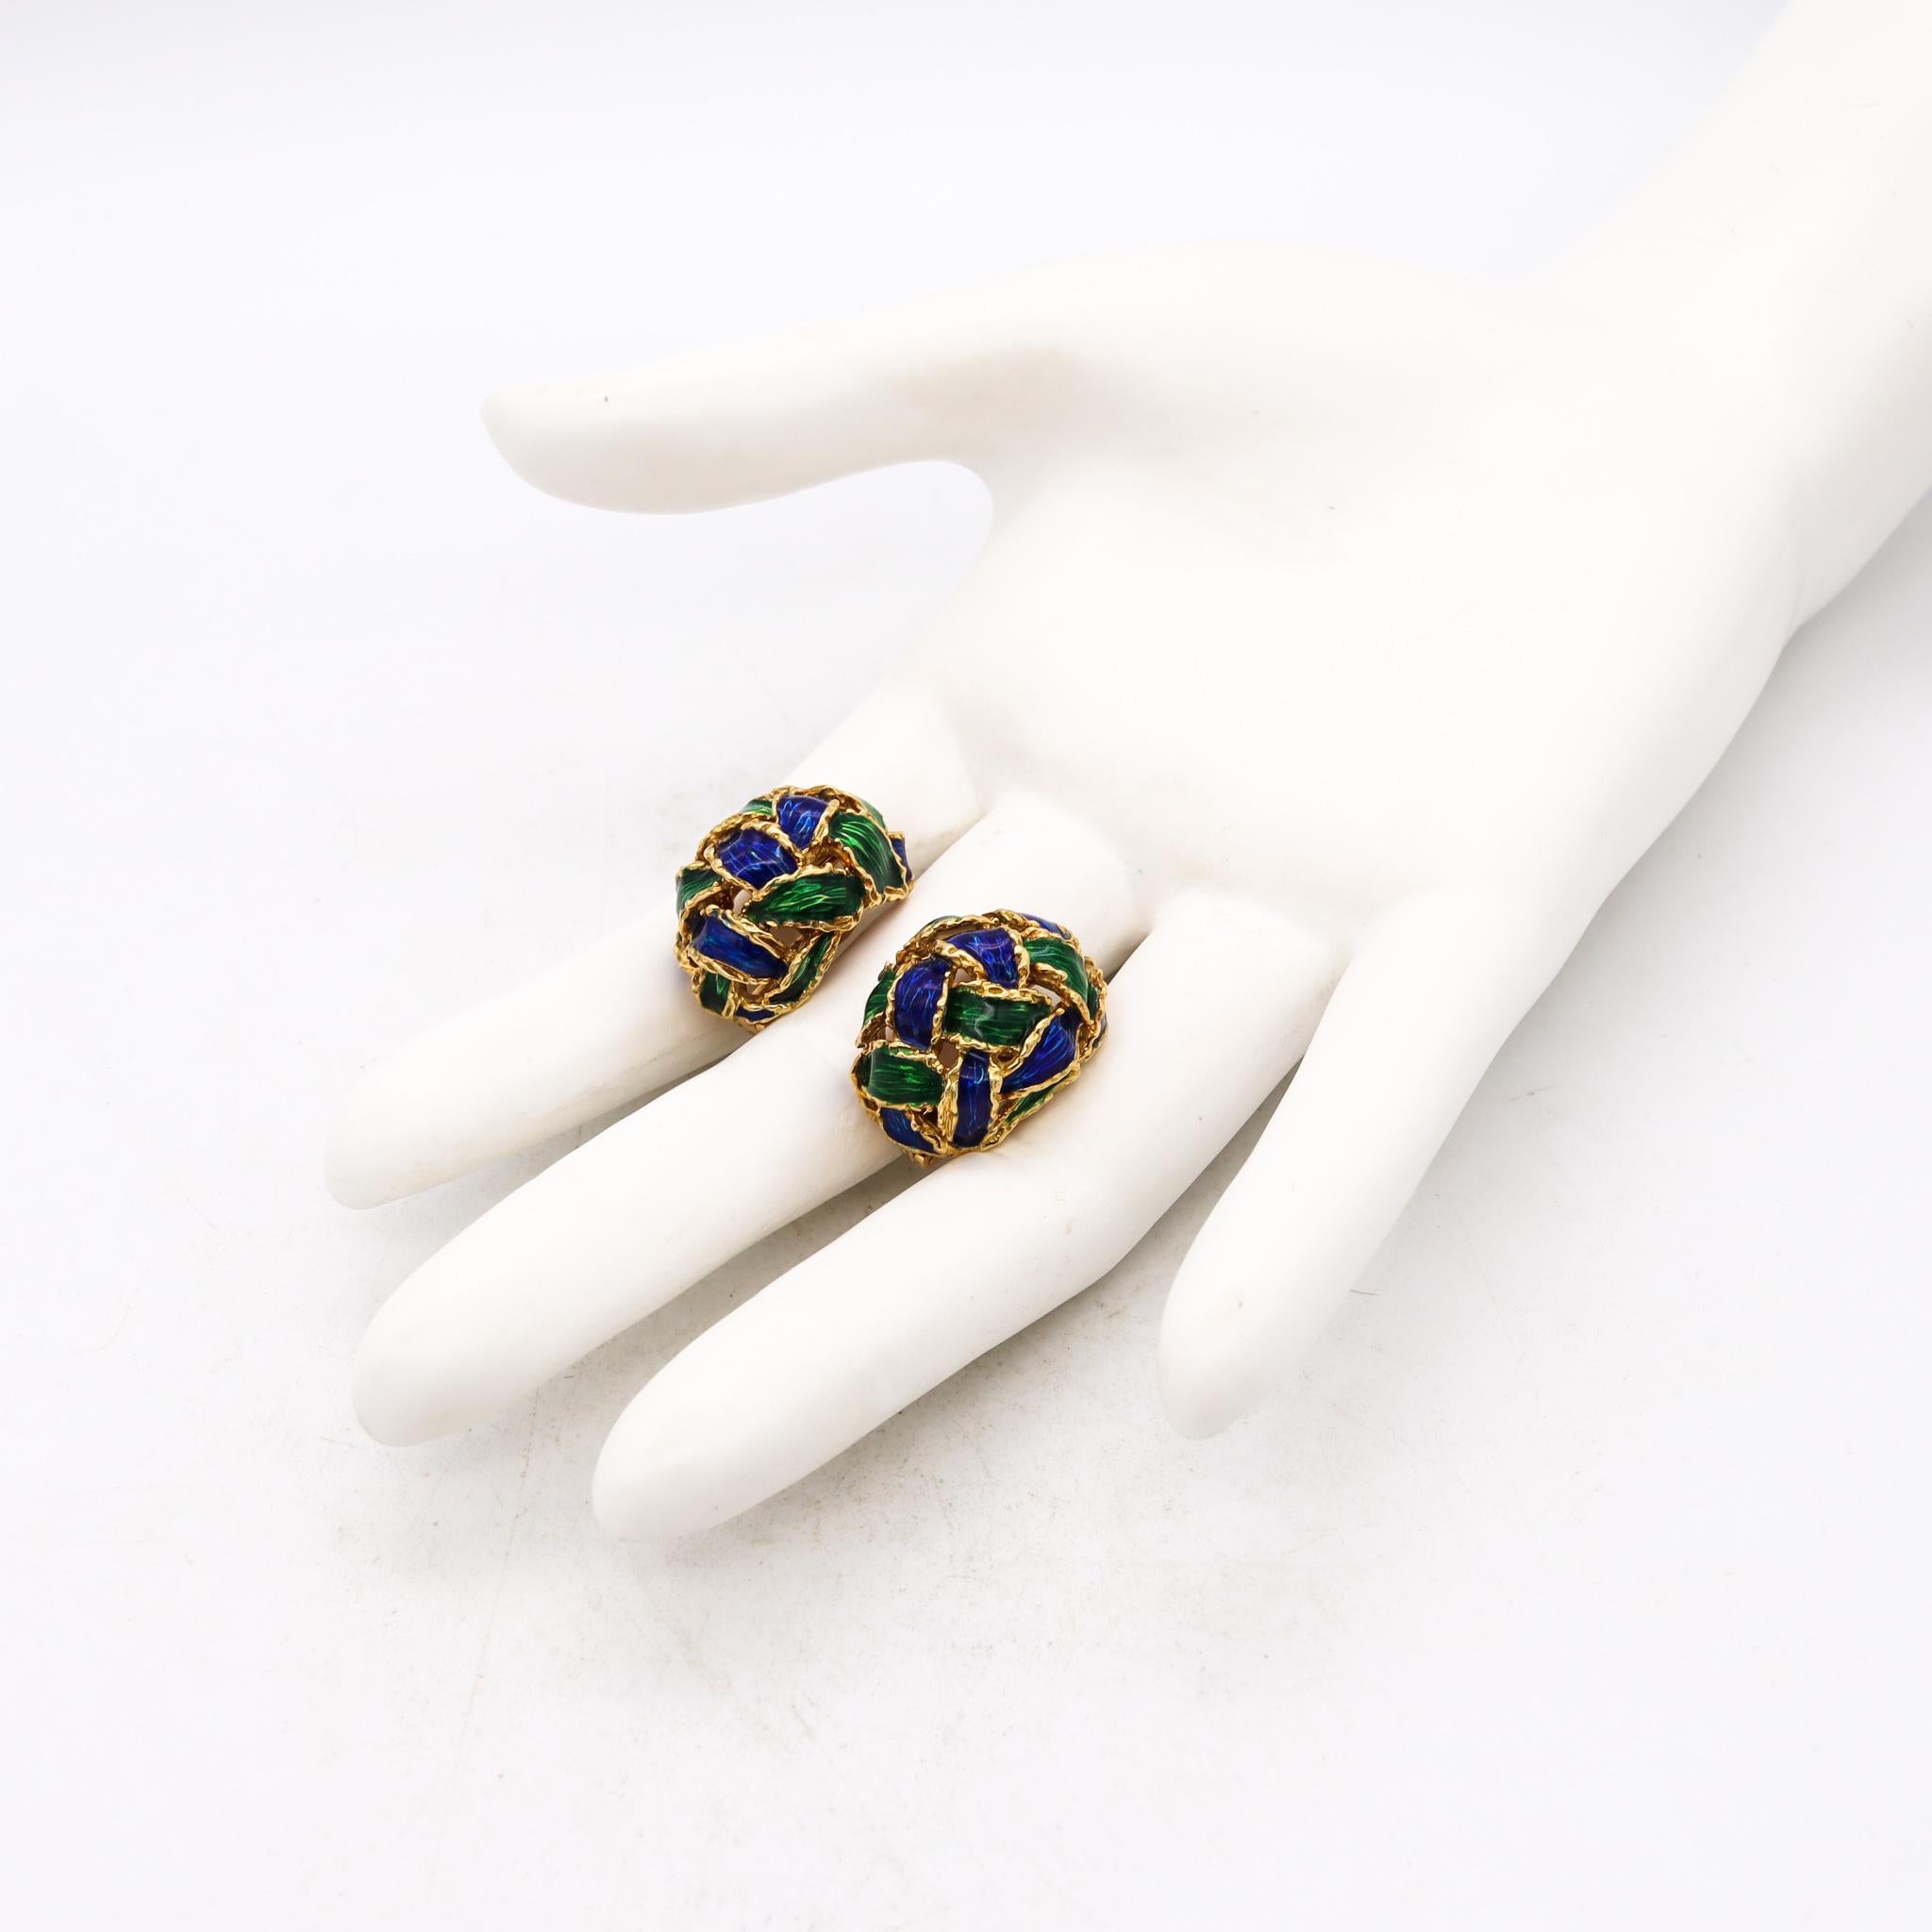 Italian enameled clips on earrings.

Vintage colorful oval bombe pair, created in Milano during the Italian transitional periods of the mid-century to the modernism, back in the 1970. These pair of clips-earrings has been carefully crafted in solid